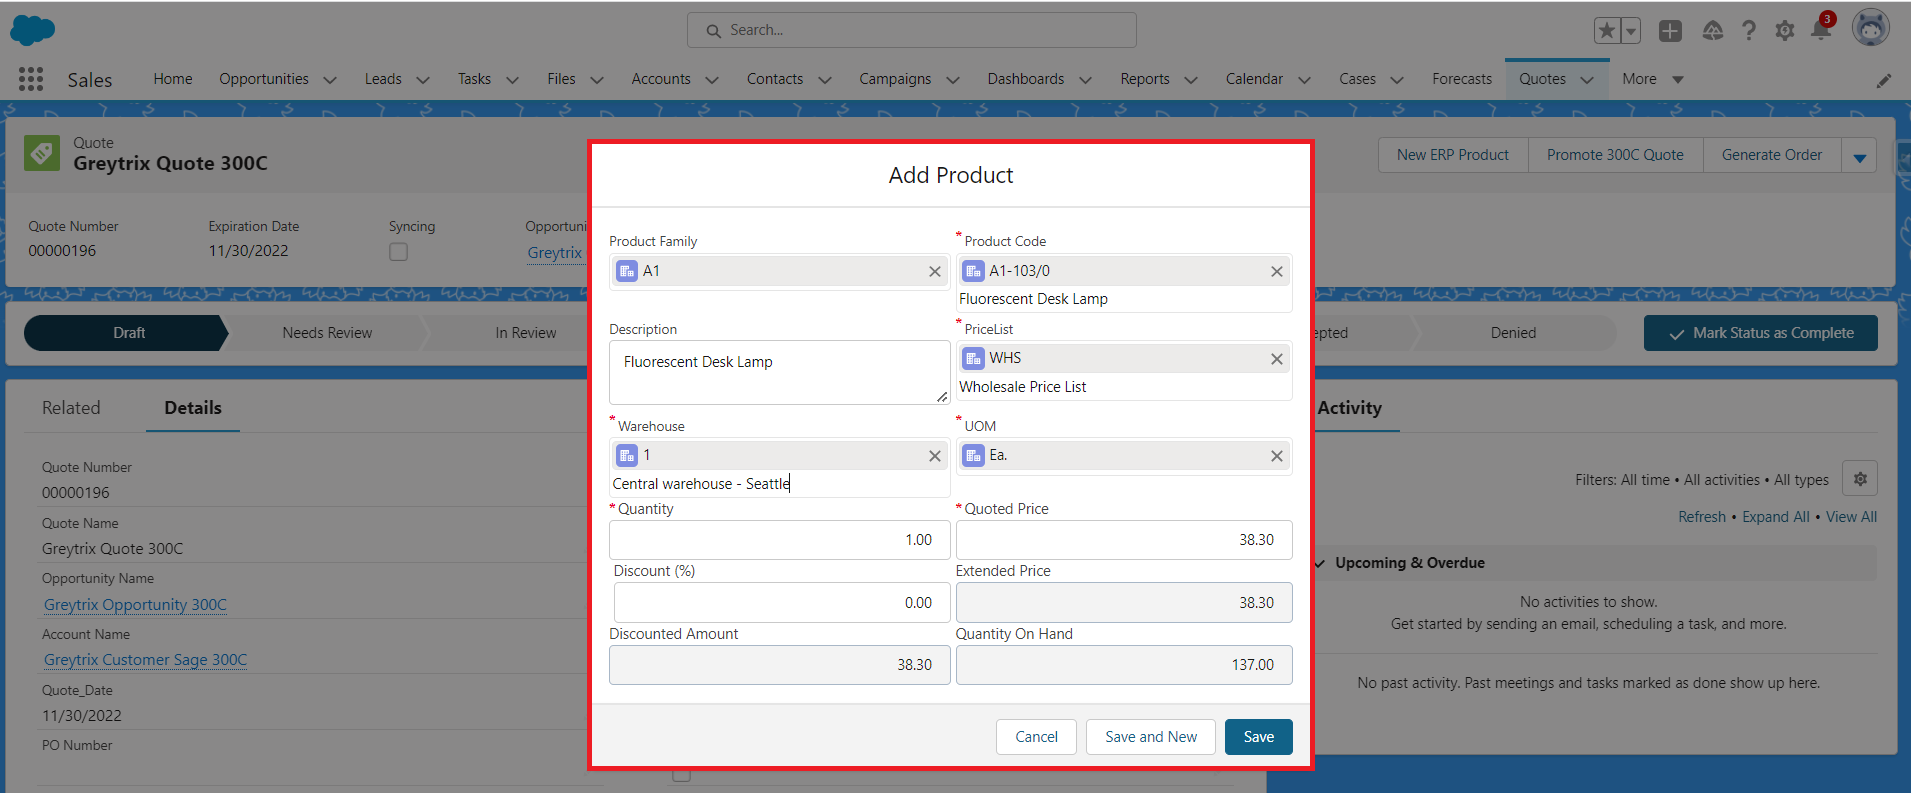 New ERP Product Layout